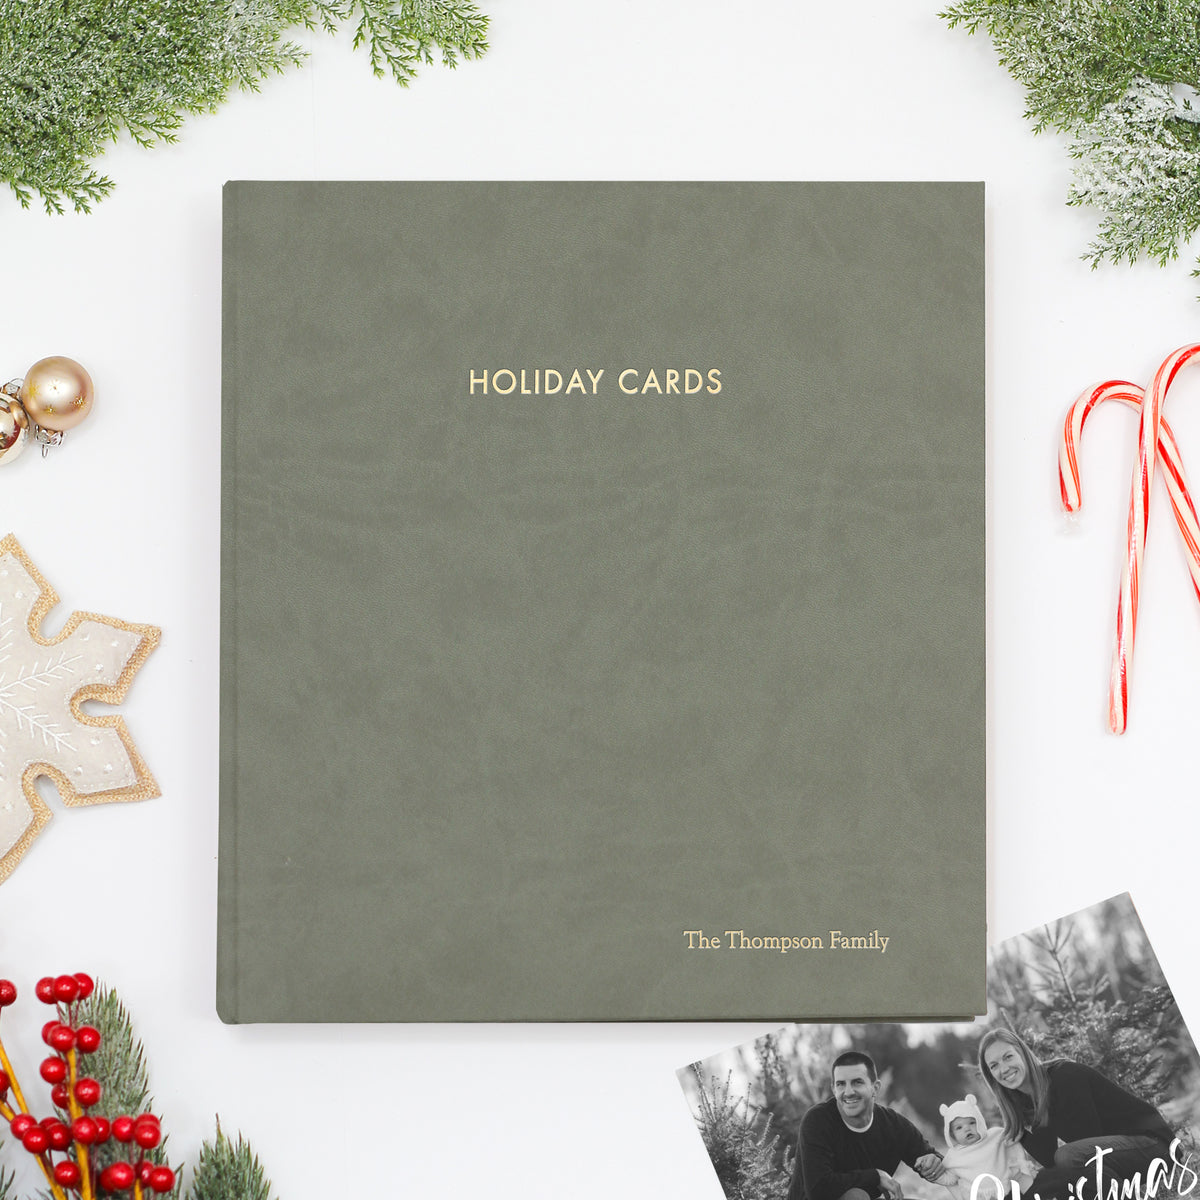 Holiday Card Album | Cover: Moss Vegan Leather | Embossed with “Holiday Cards” | Available Personalized